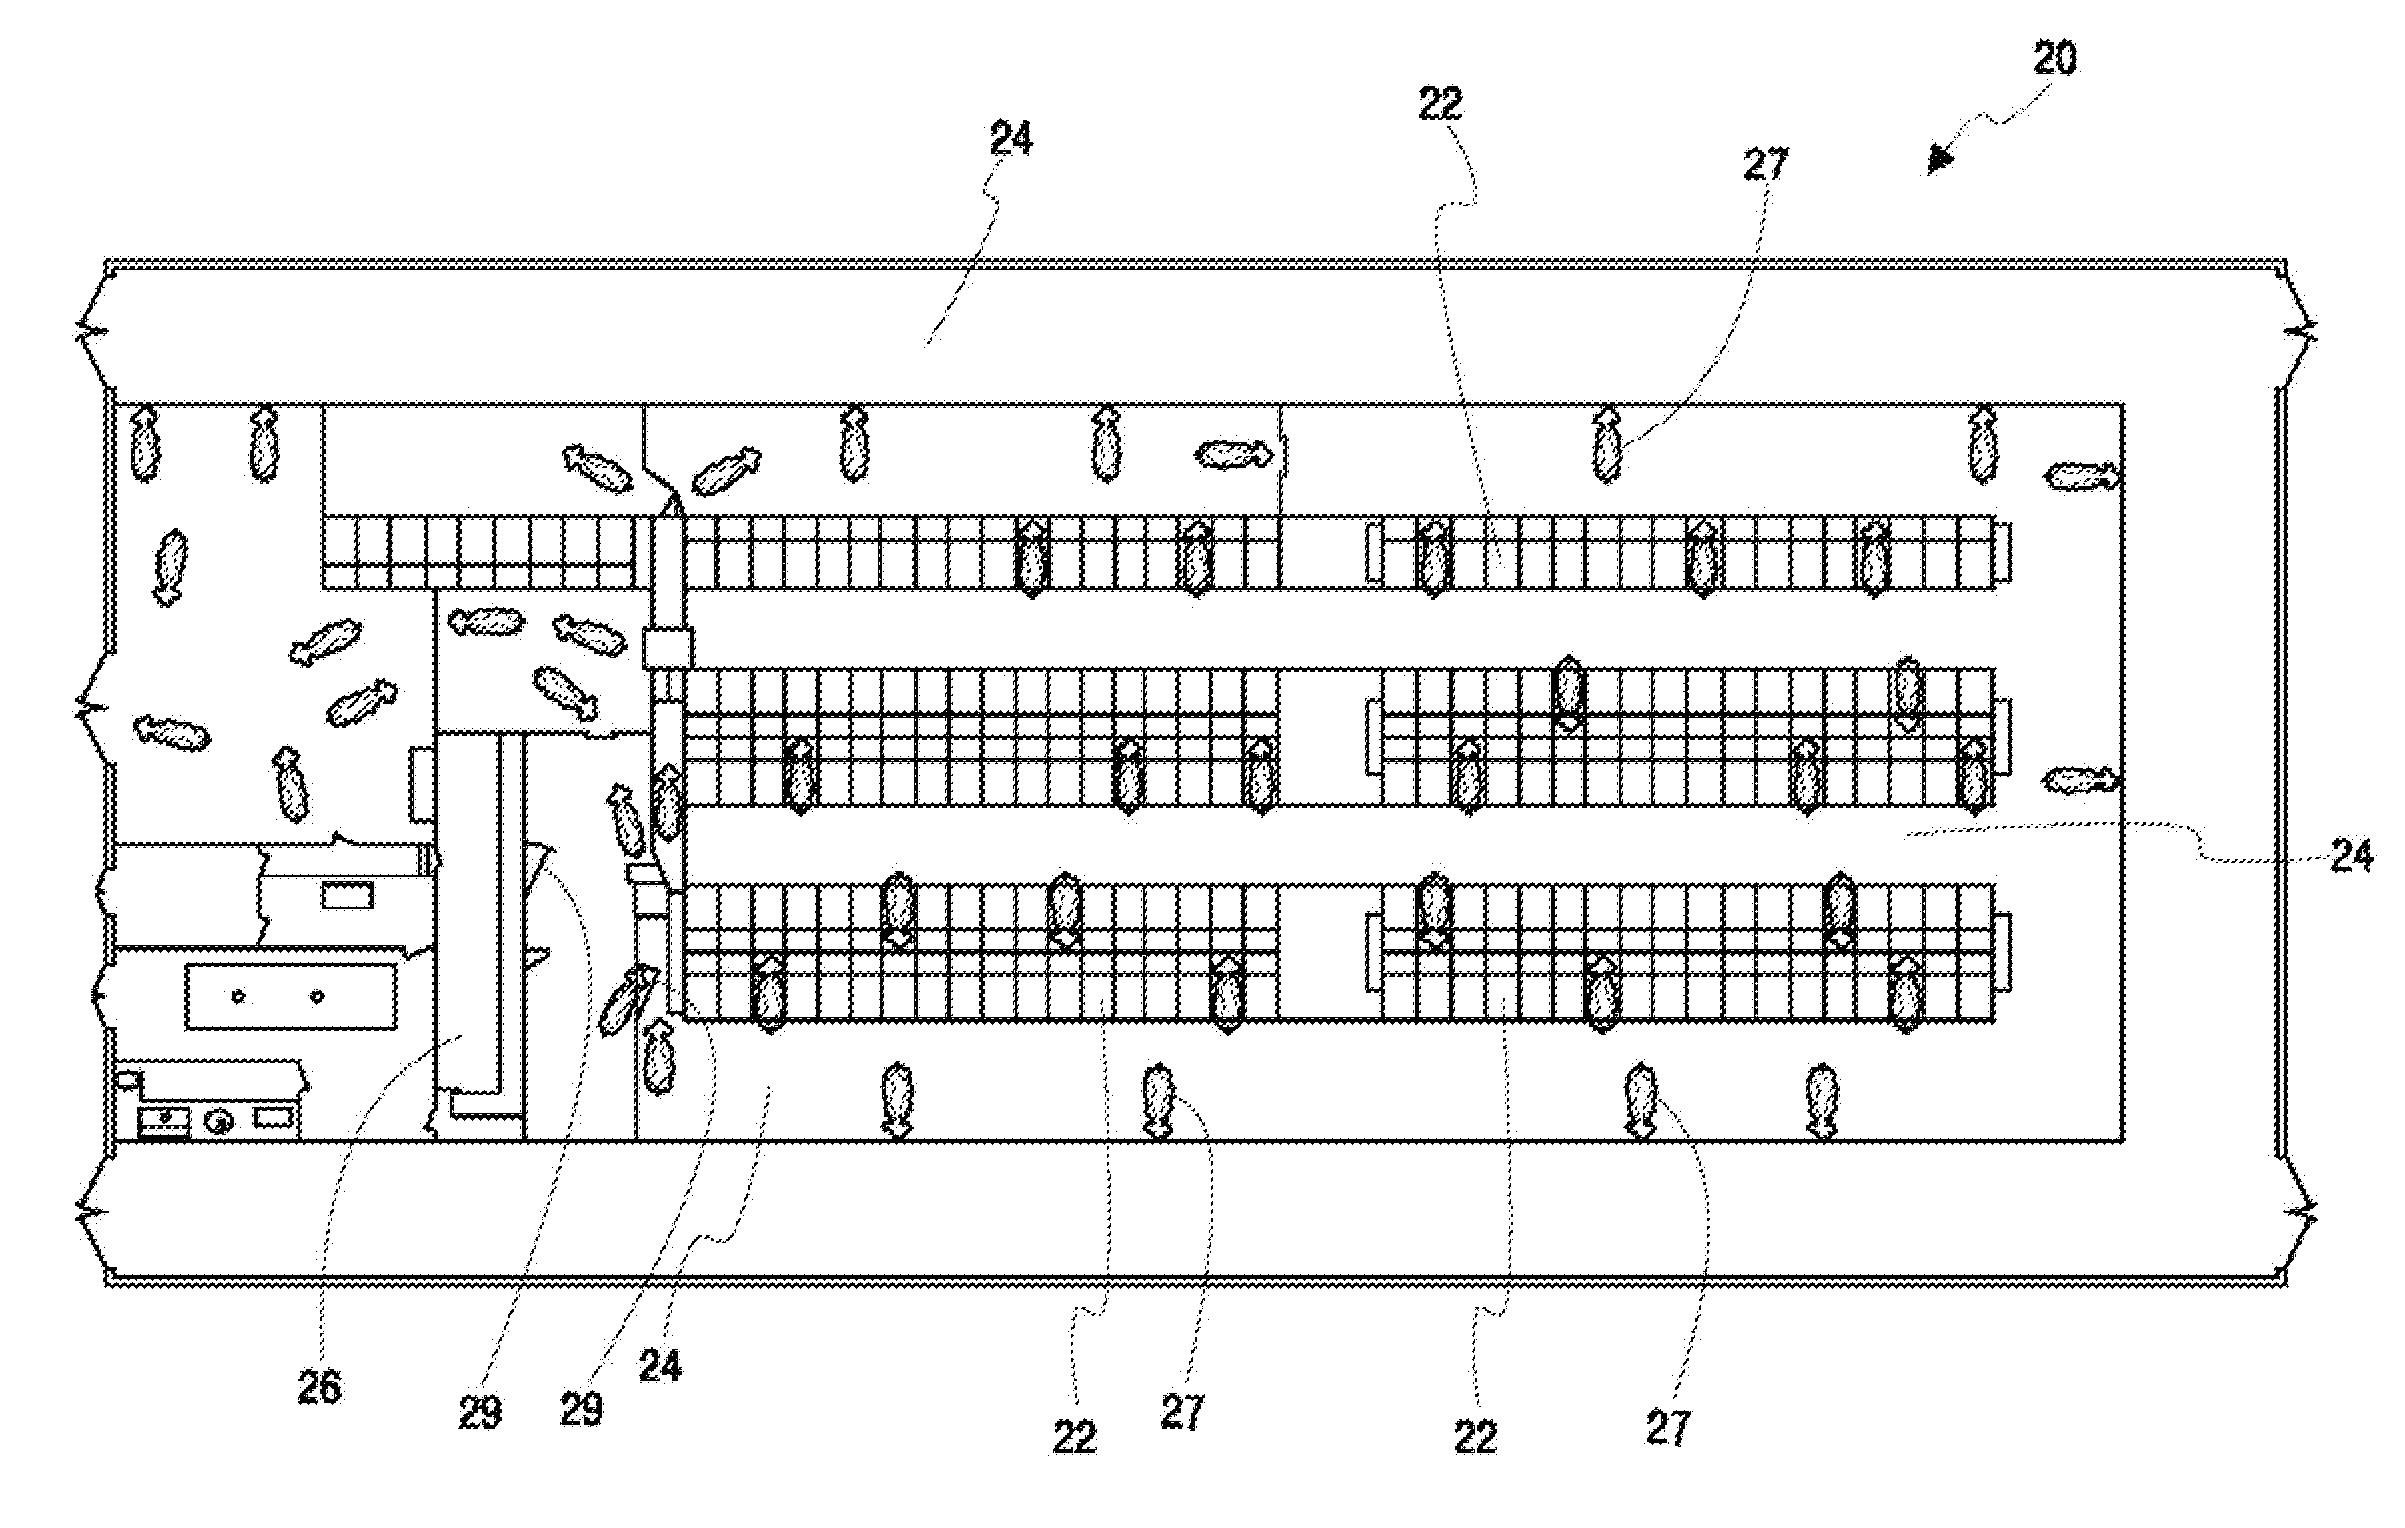 Dairy harvesting facility with milk line protection system and methods